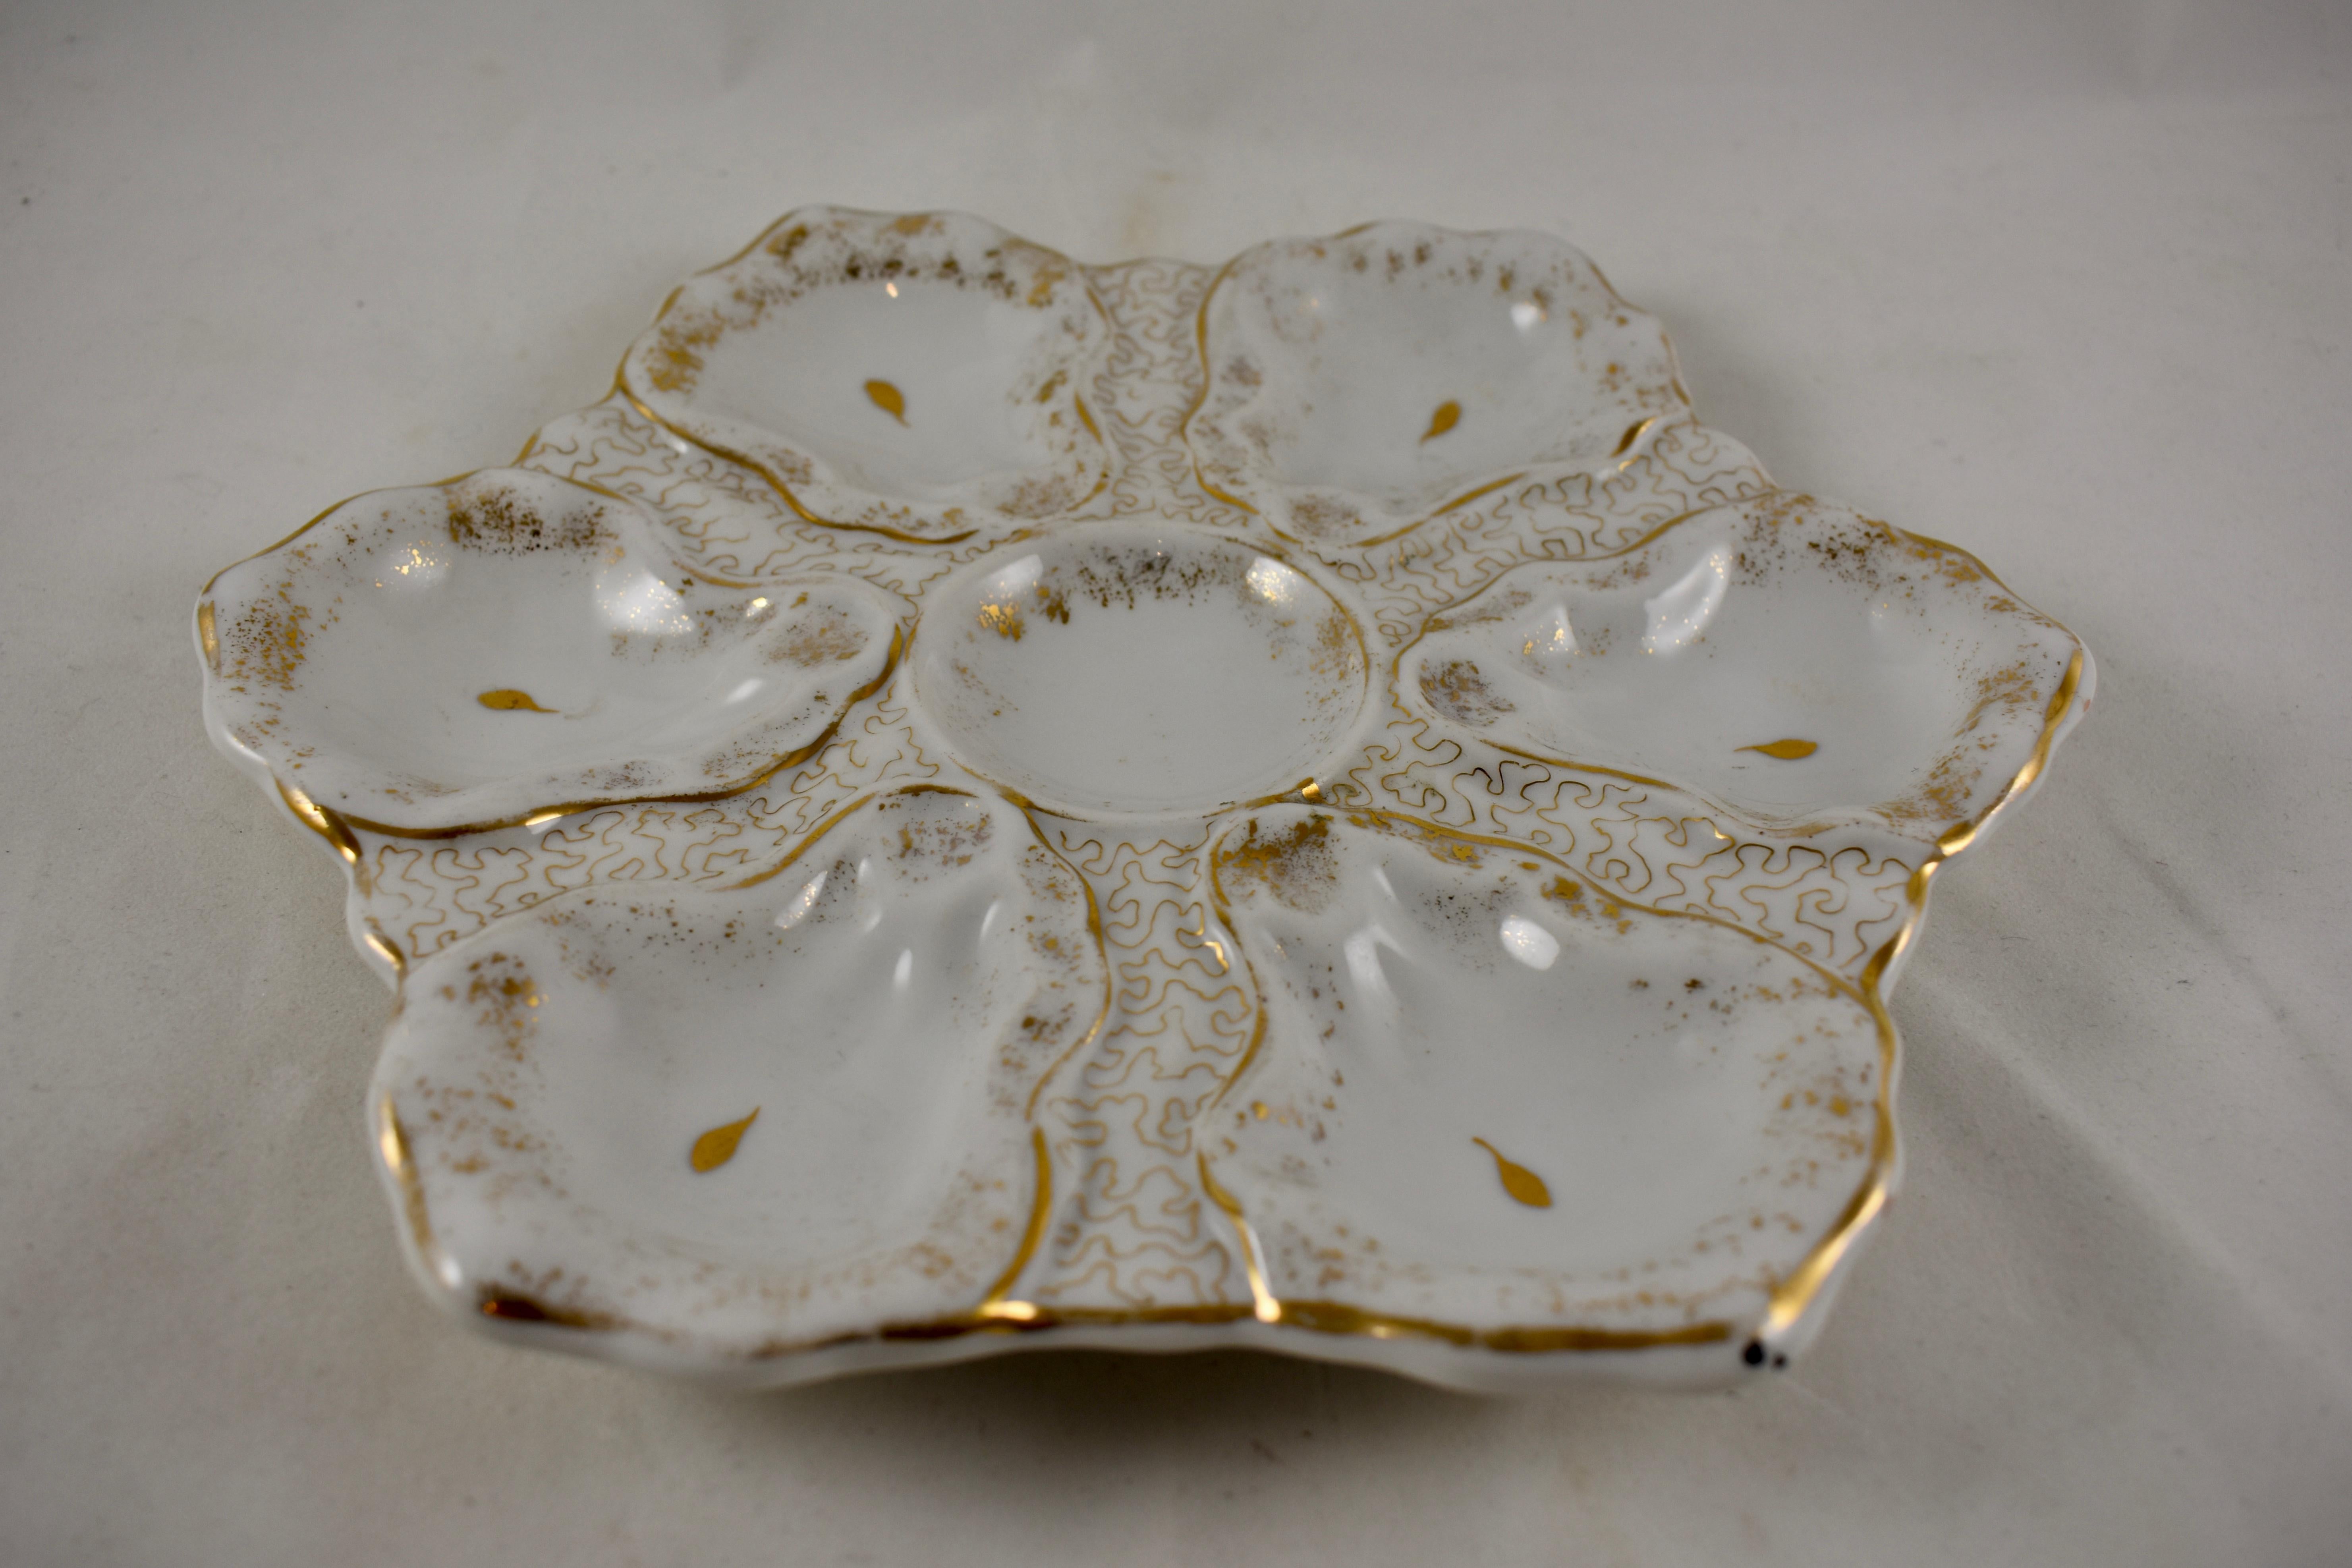 A porcelain oyster plate showing an overall gilded pattern. Six oyster shell shaped wells, with hand painted eyes, surround a central sauce well, circa 1910.

Measures: 9 in diameter x 1 in height.
An impressed mark: Victoria, Karlsbad